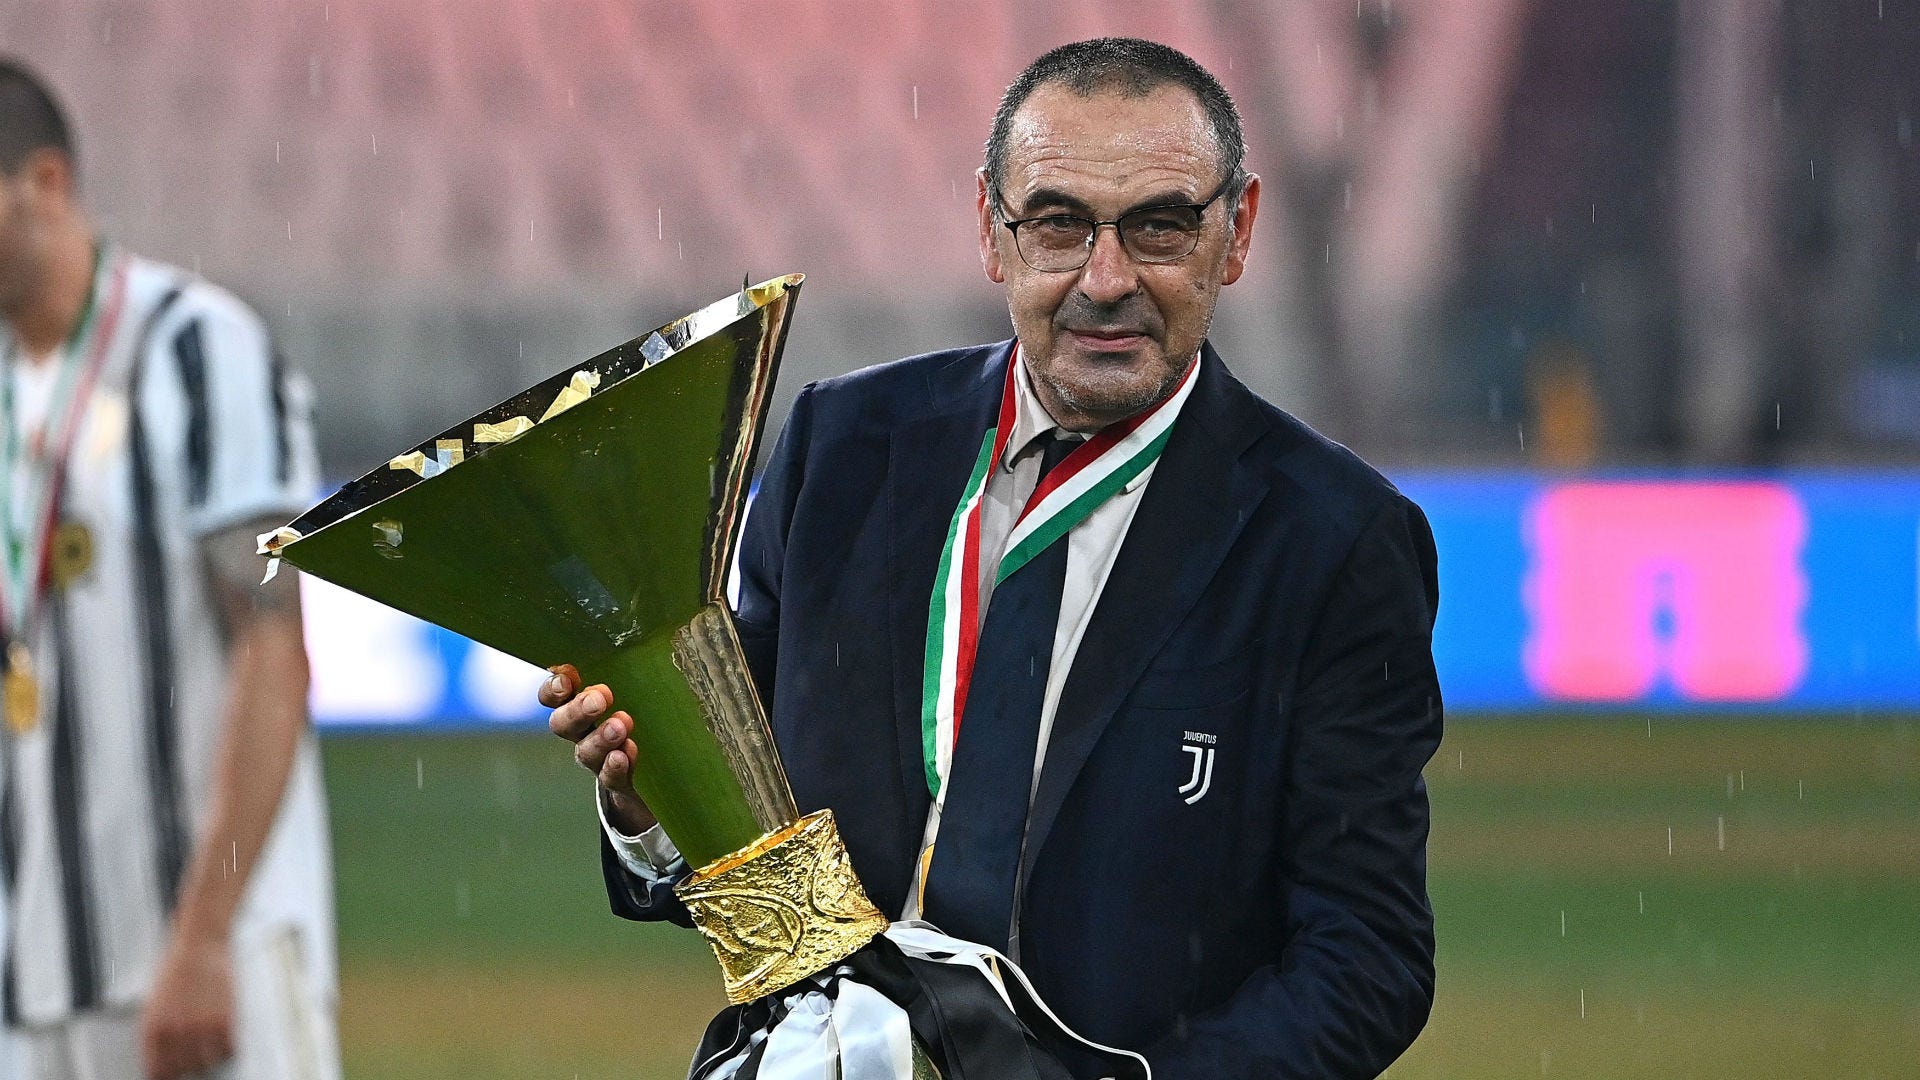 Juventus had a mental decline after wrapping up Serie A - Sarri | Goal.com